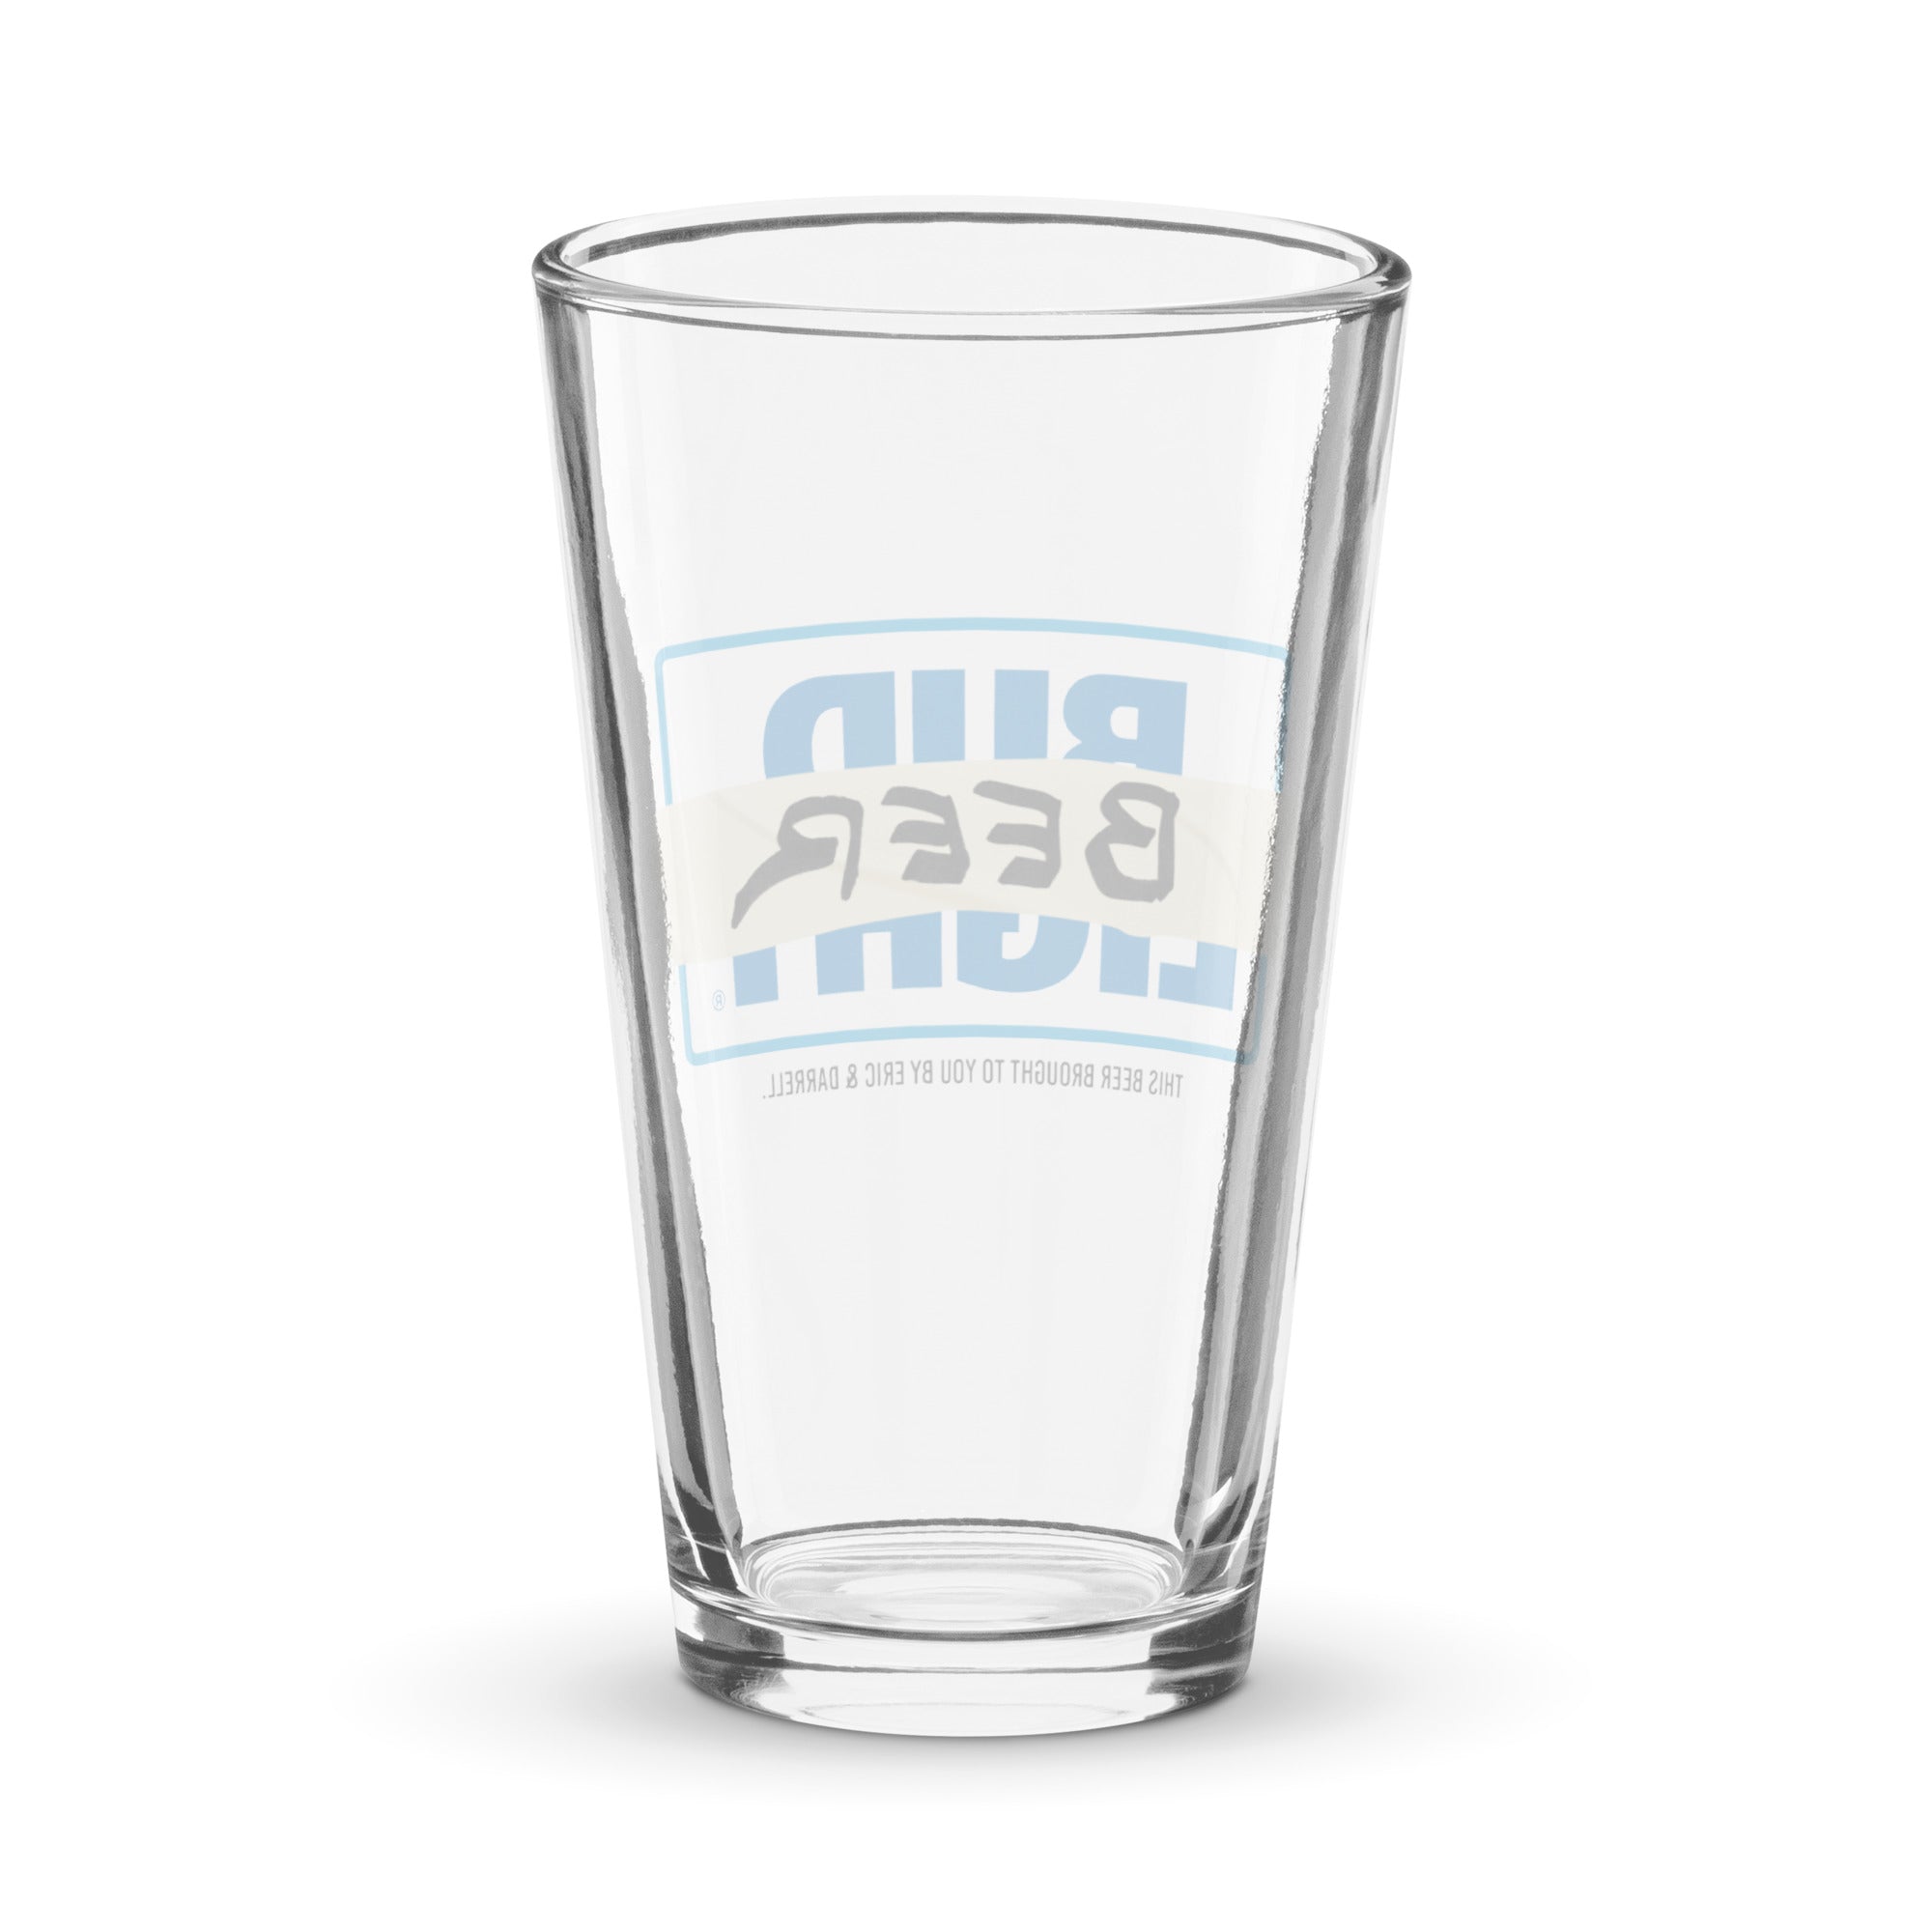 Funny Beer Glass | Oh Look, Its F this SH o'clock | 16oz Pint Glass